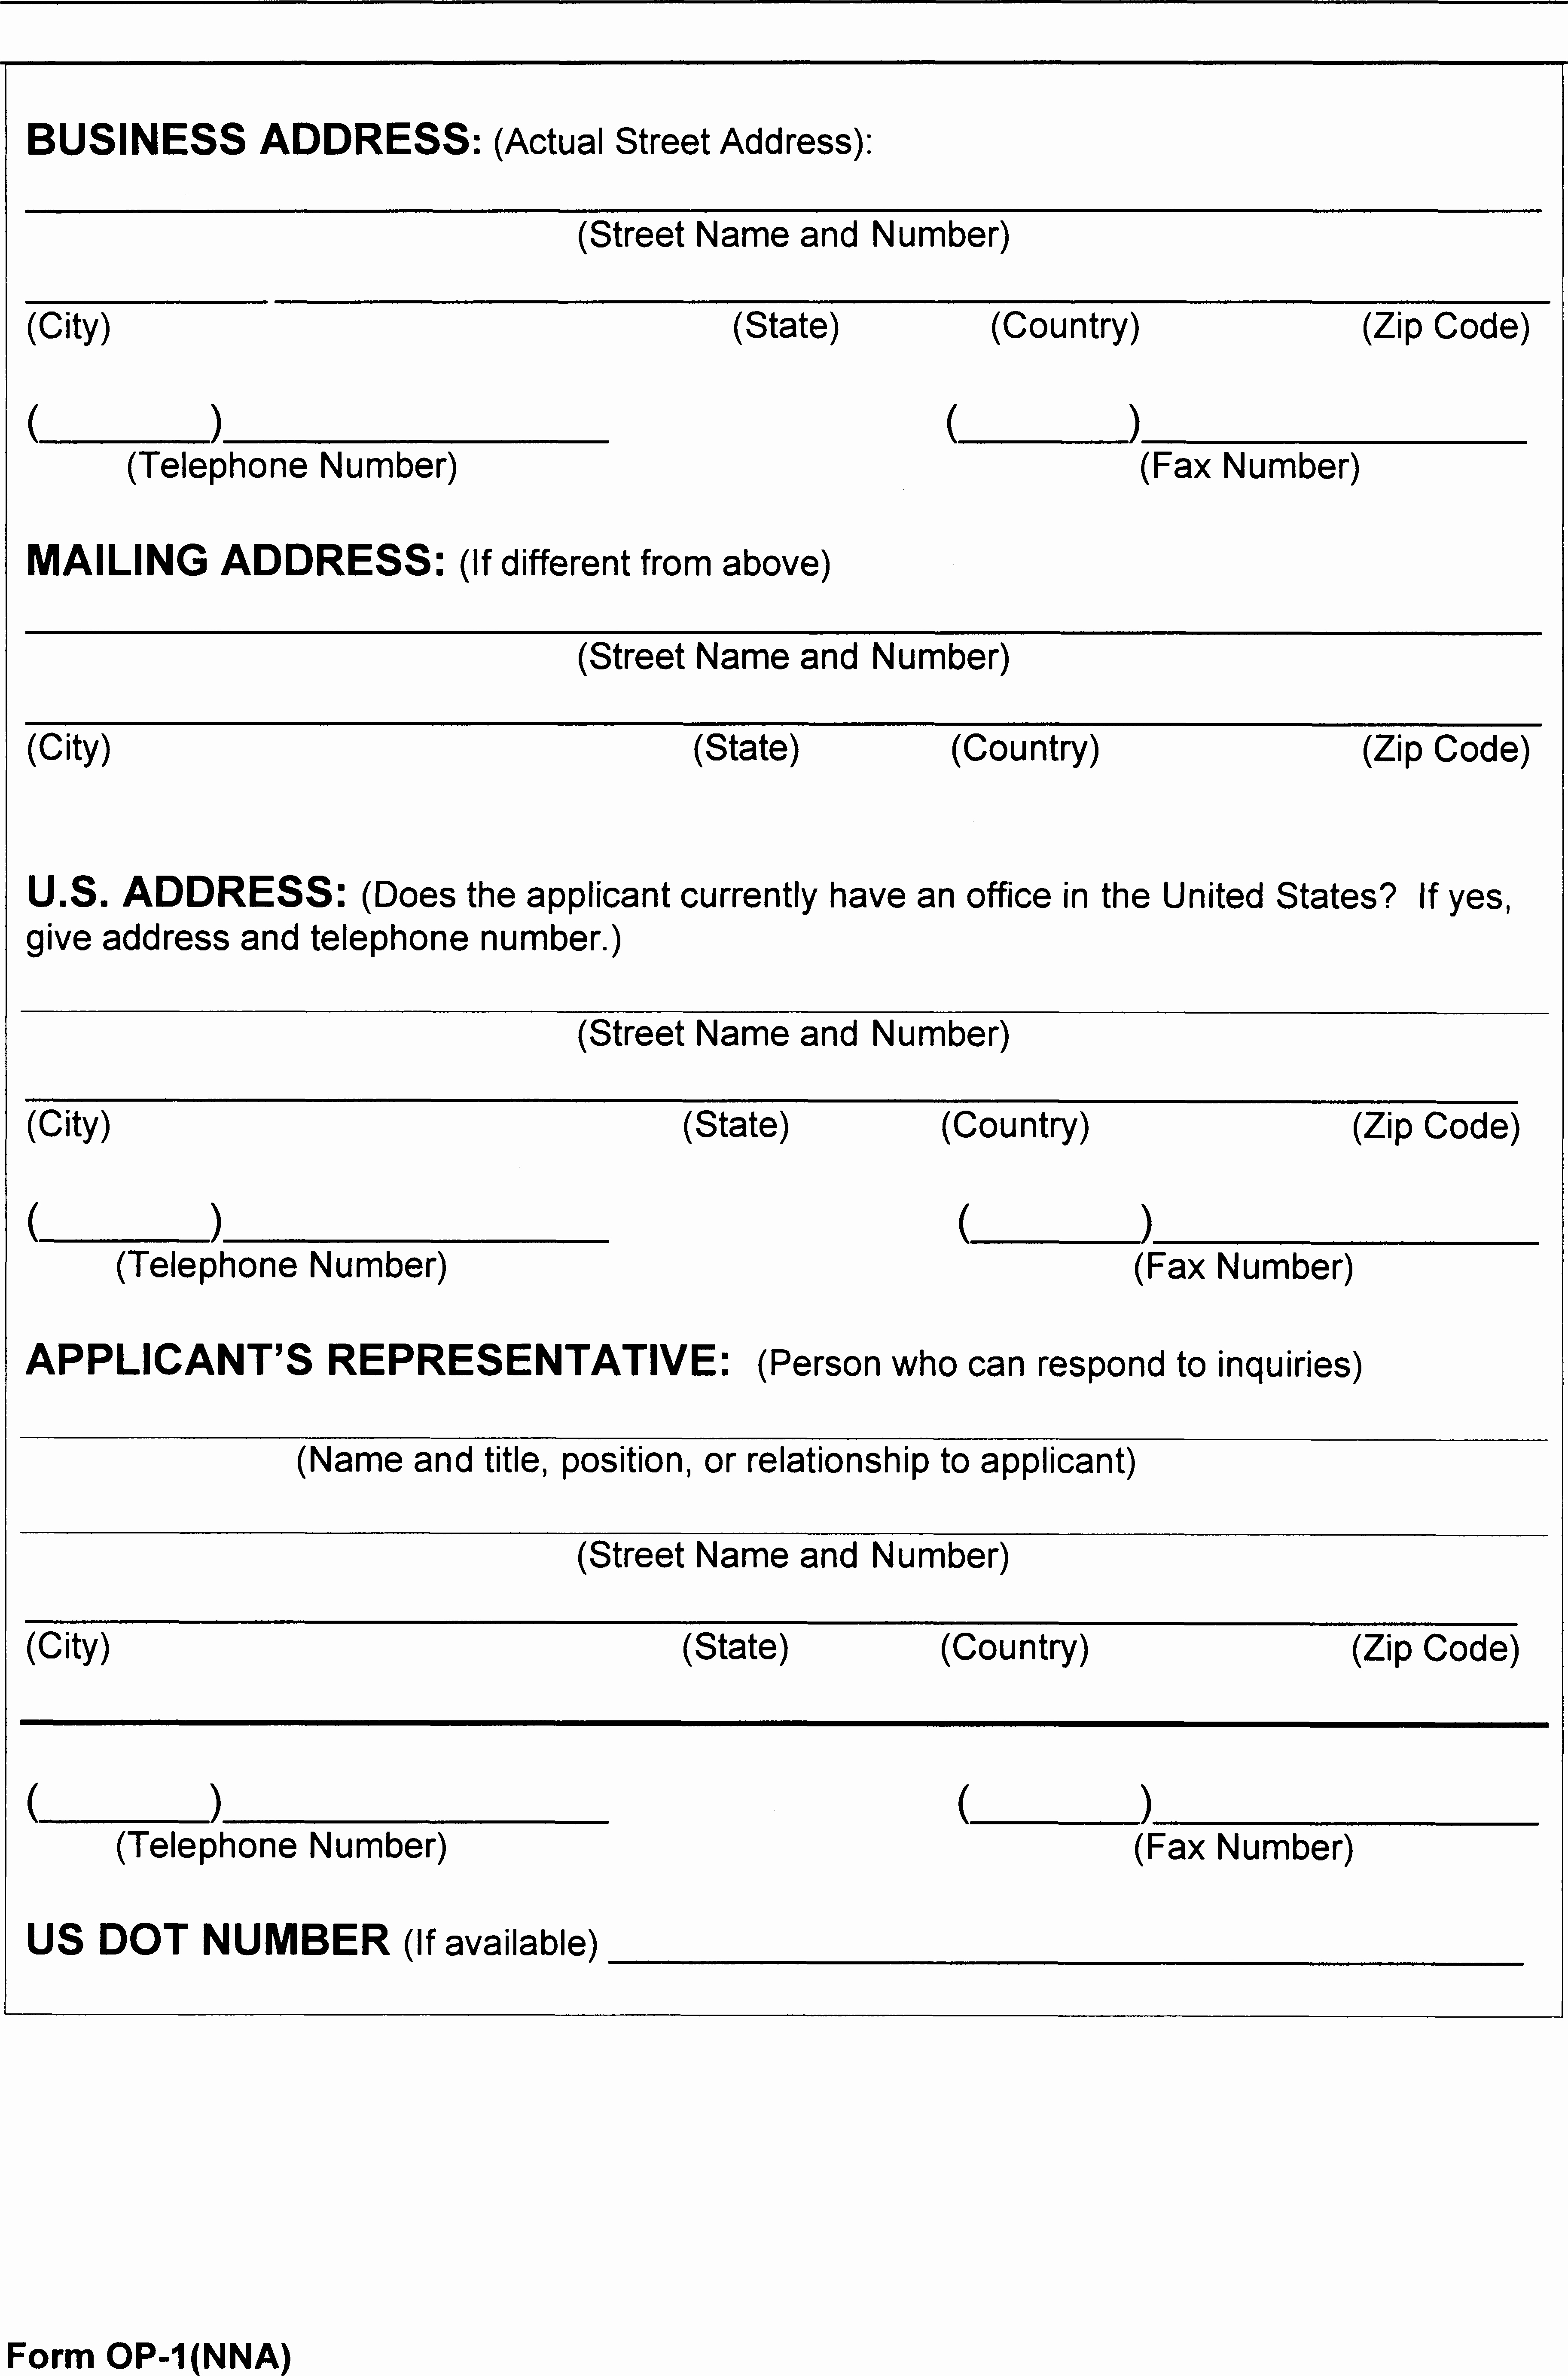 Fmcsa Safety Management Plan Template Lovely Fmcsa Accident forms